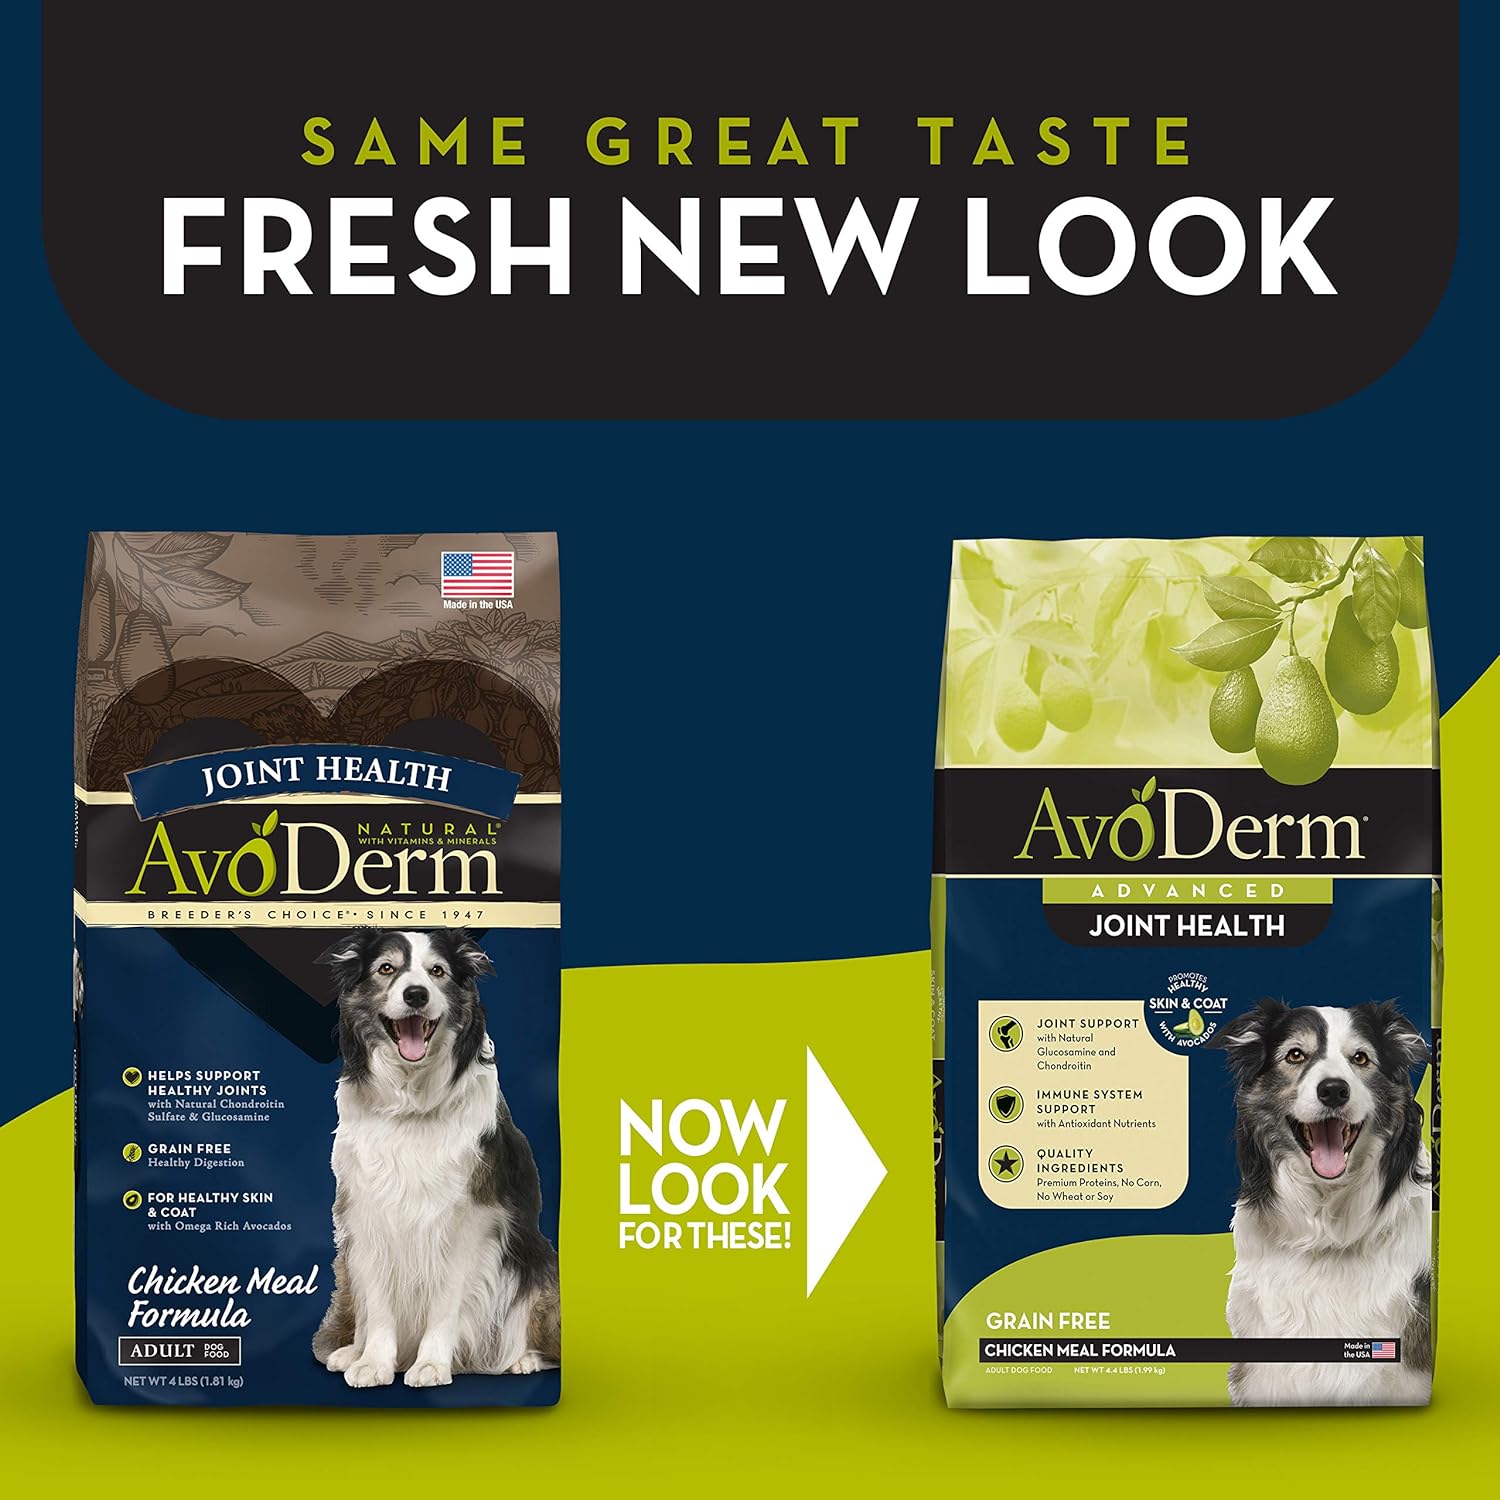 AvoDerm Natural Joint Health Grain-Free Chicken Meal Formula Dry Dog Food – Gallery Image 2